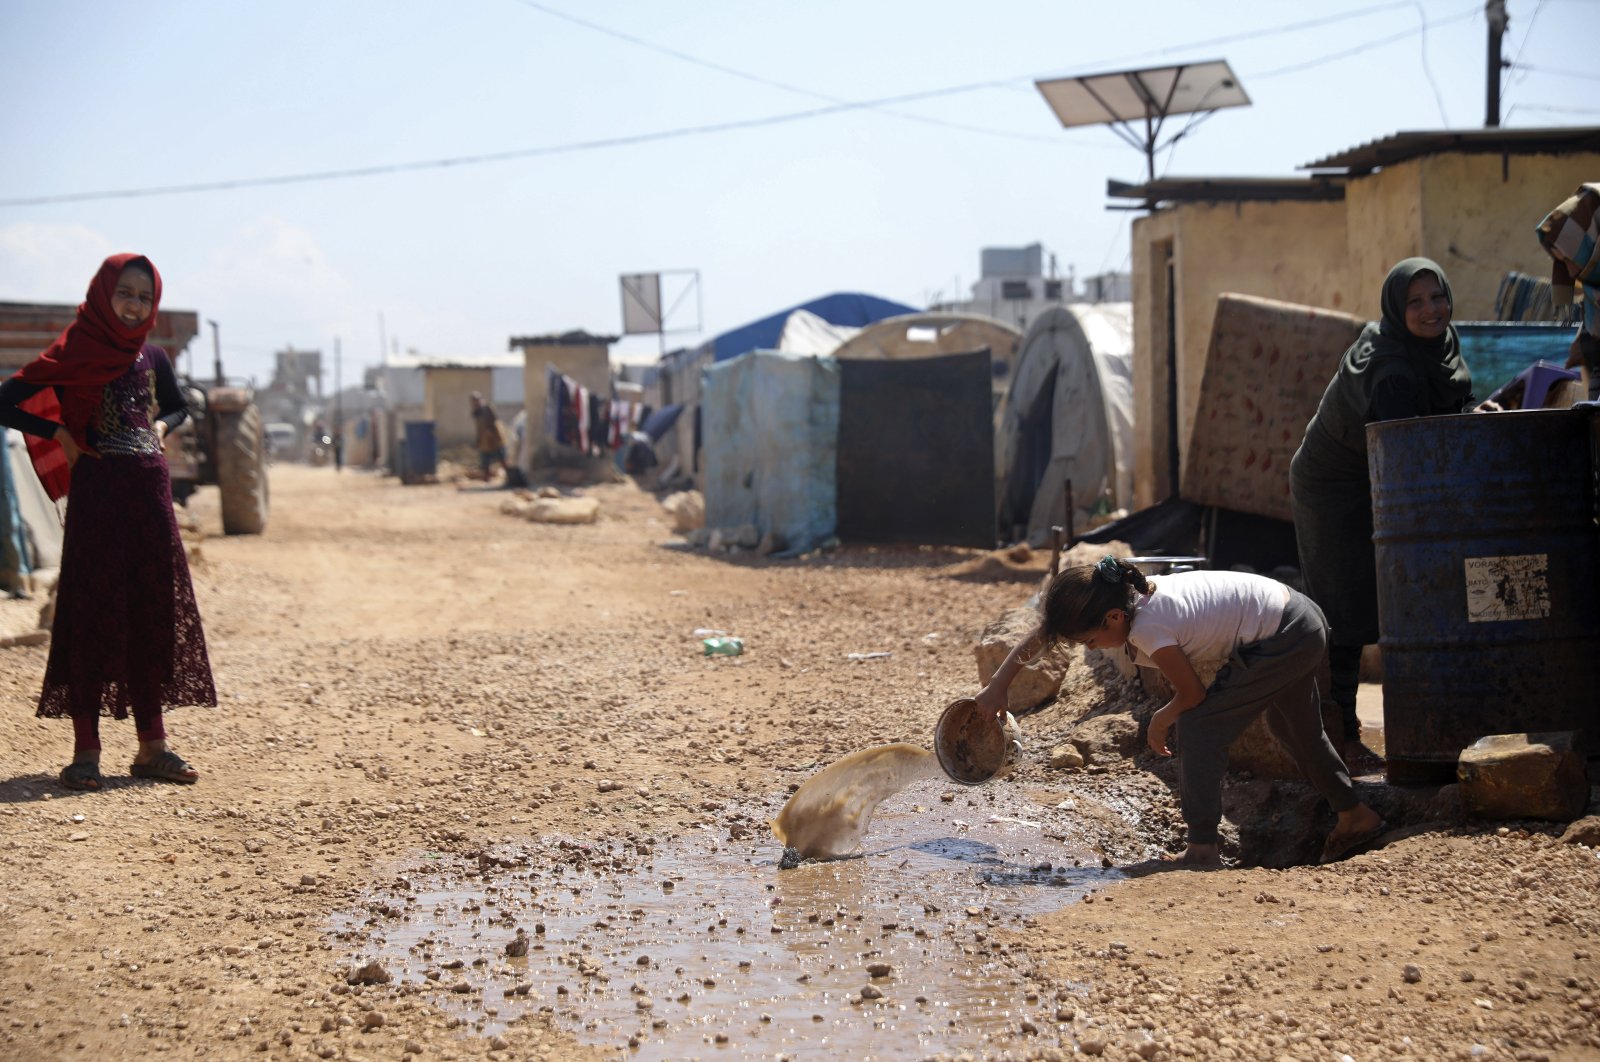 This file photo shows a large refugee camp on the Syrian side of the border with Turkey, near the town of Atma, in Idlib province, Syria, April 19, 2020. (AP Photo)